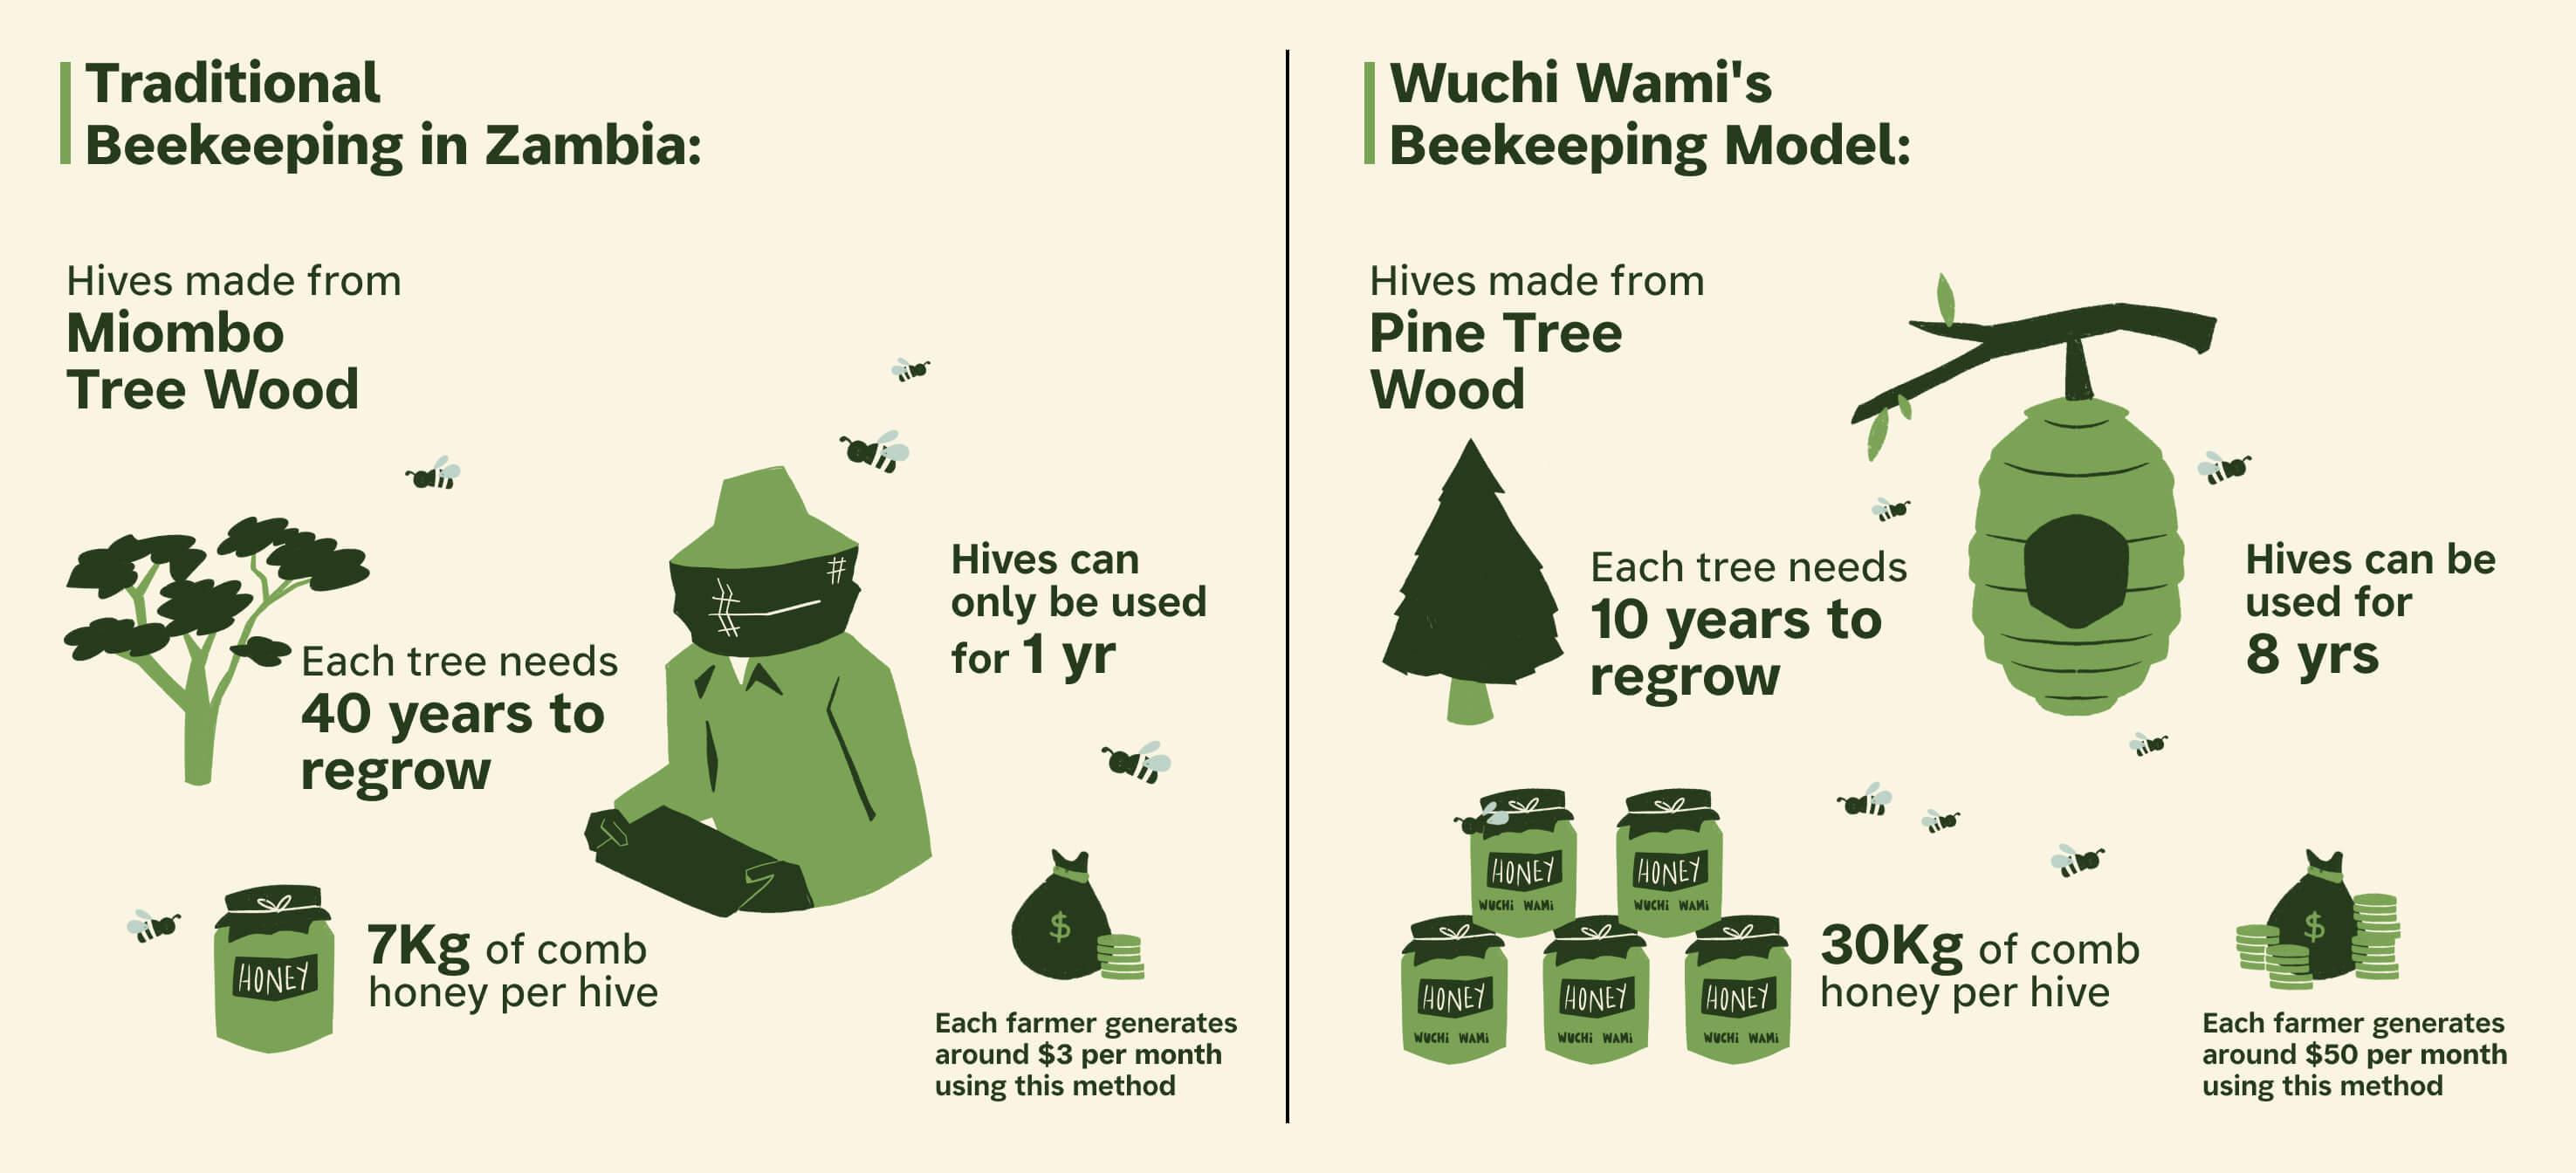 Wuchi Wami’s beekeeping utilises sustainable methods to increase production while preserving local Miombo trees. 
Infographic: The Climate Tribe